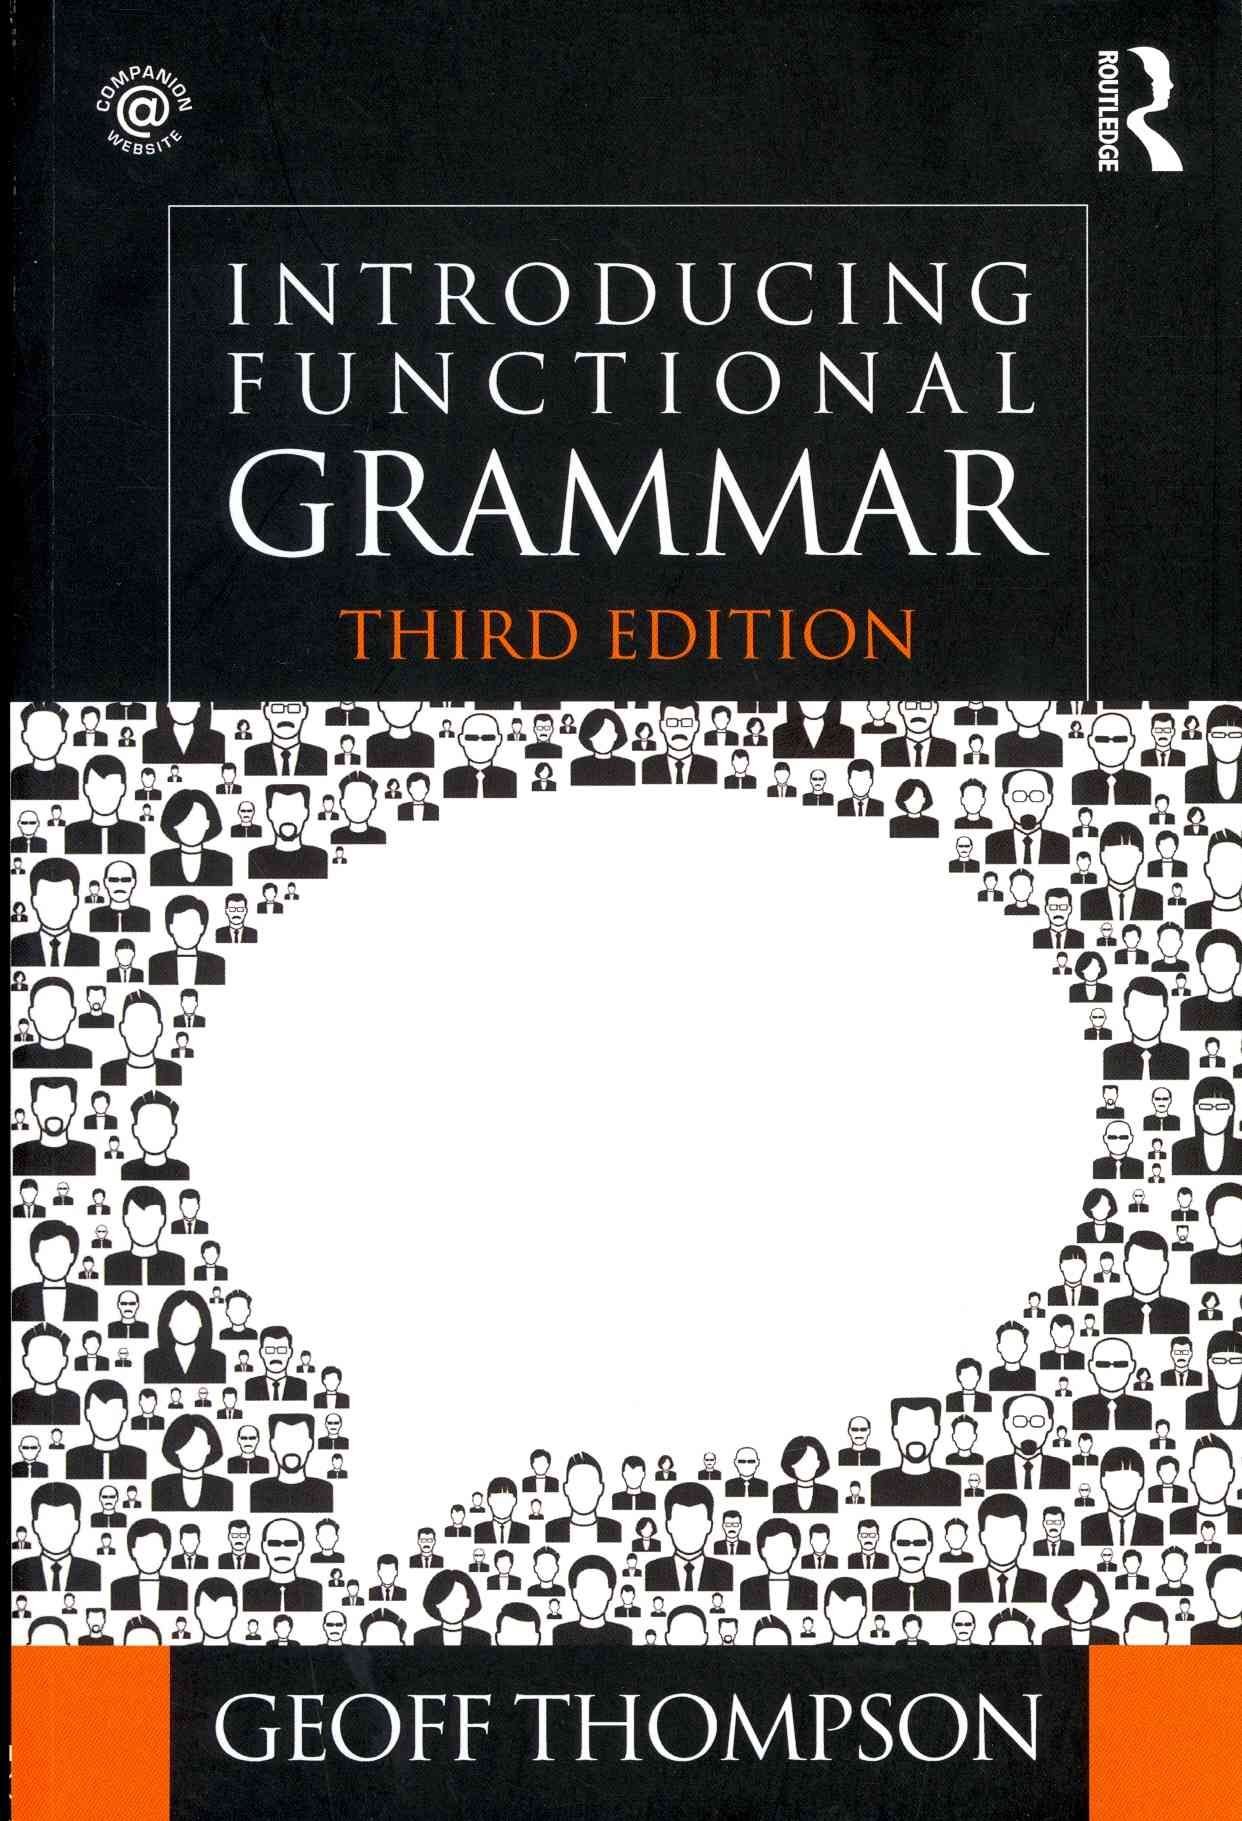 Free　Delivery　by　Buy　Grammar　Thompson　Introducing　With　Functional　Geoff